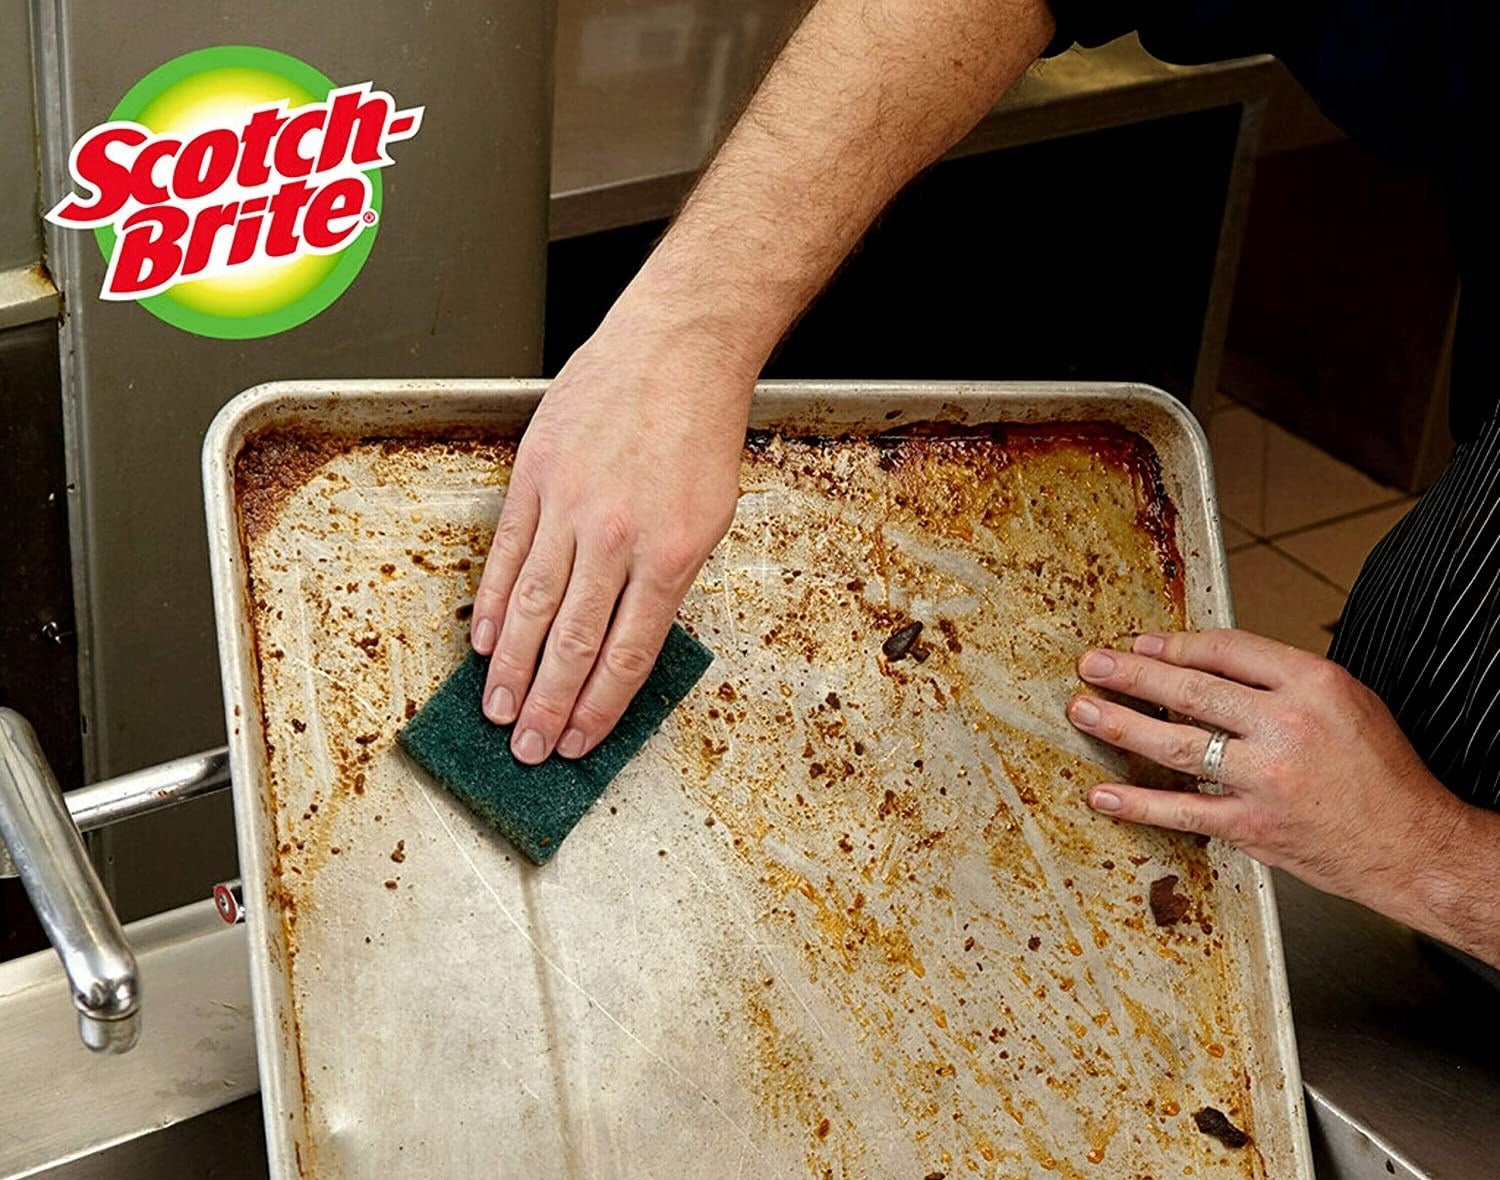 the green scrubbing pad being used on a dirty baking sheet